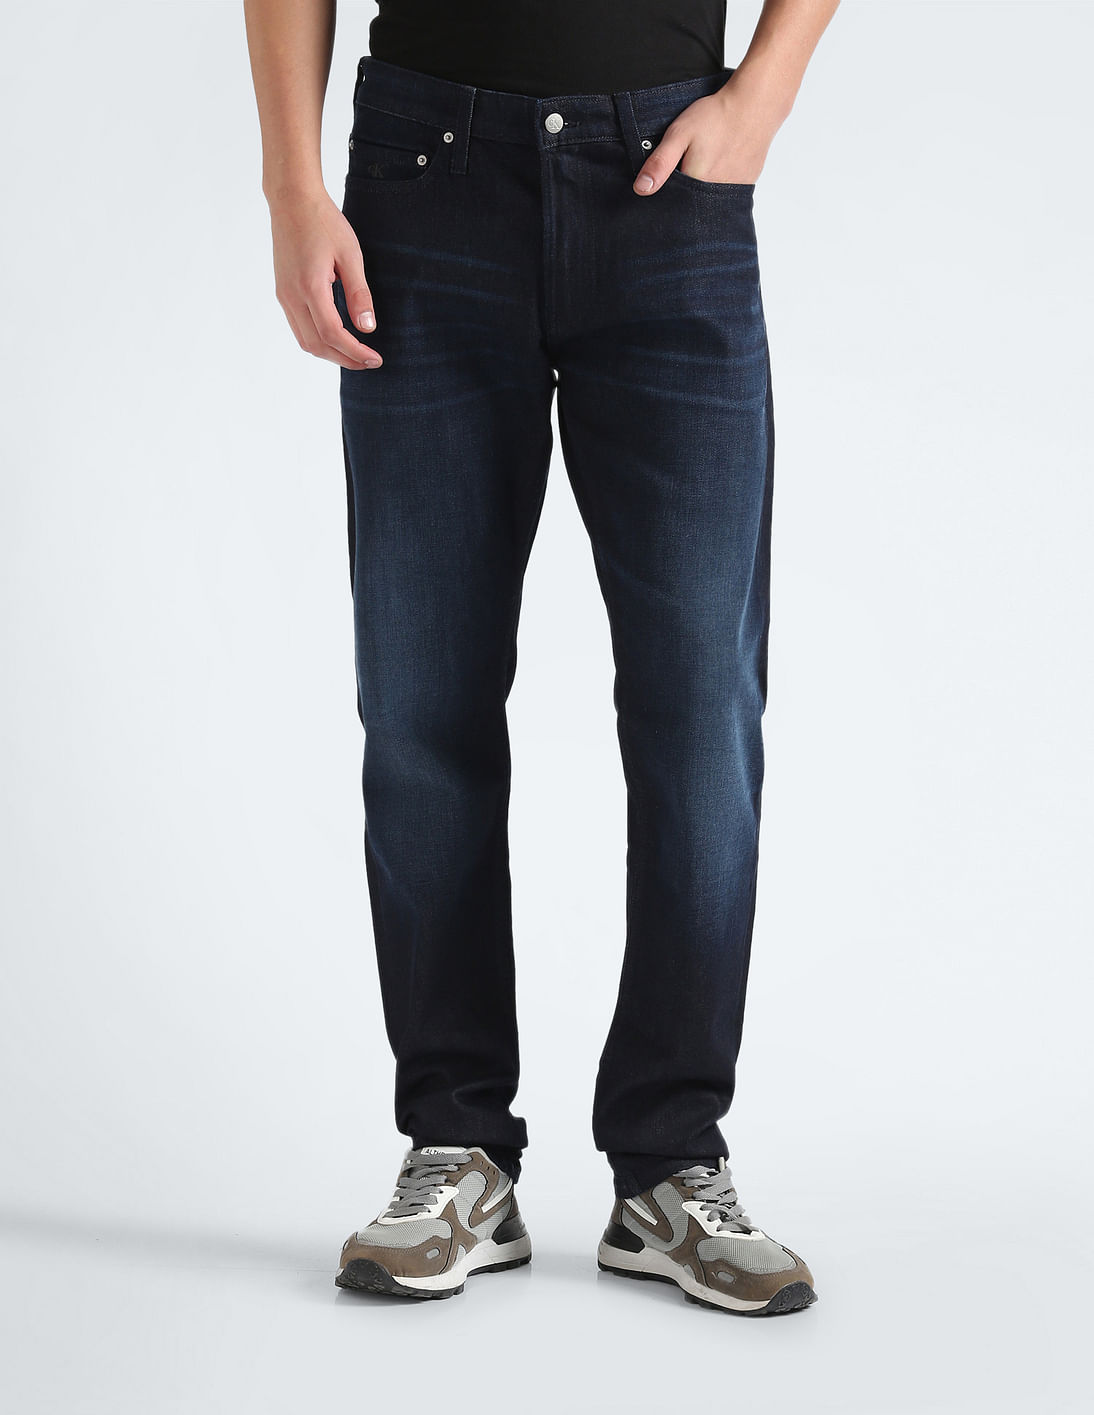 Buy Calvin Klein Mid Rise Stone Wash Jeans - NNNOW.com